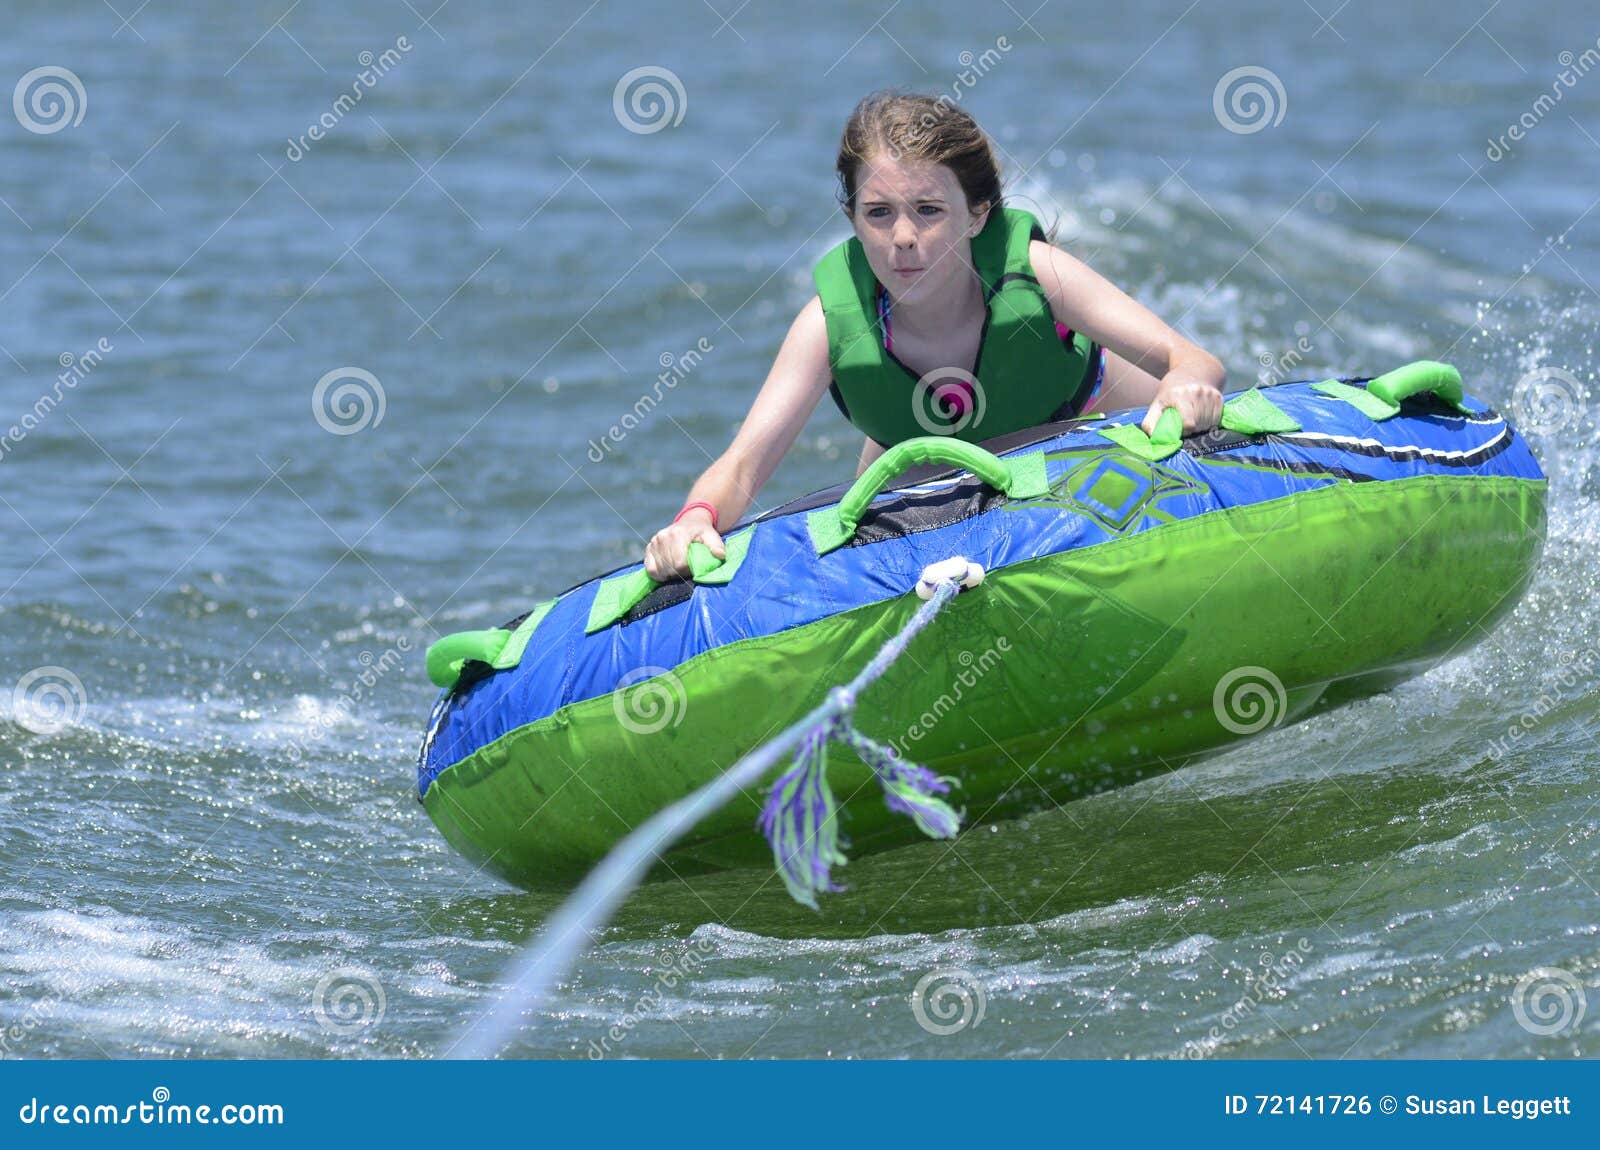 young teen tubing behind a boat